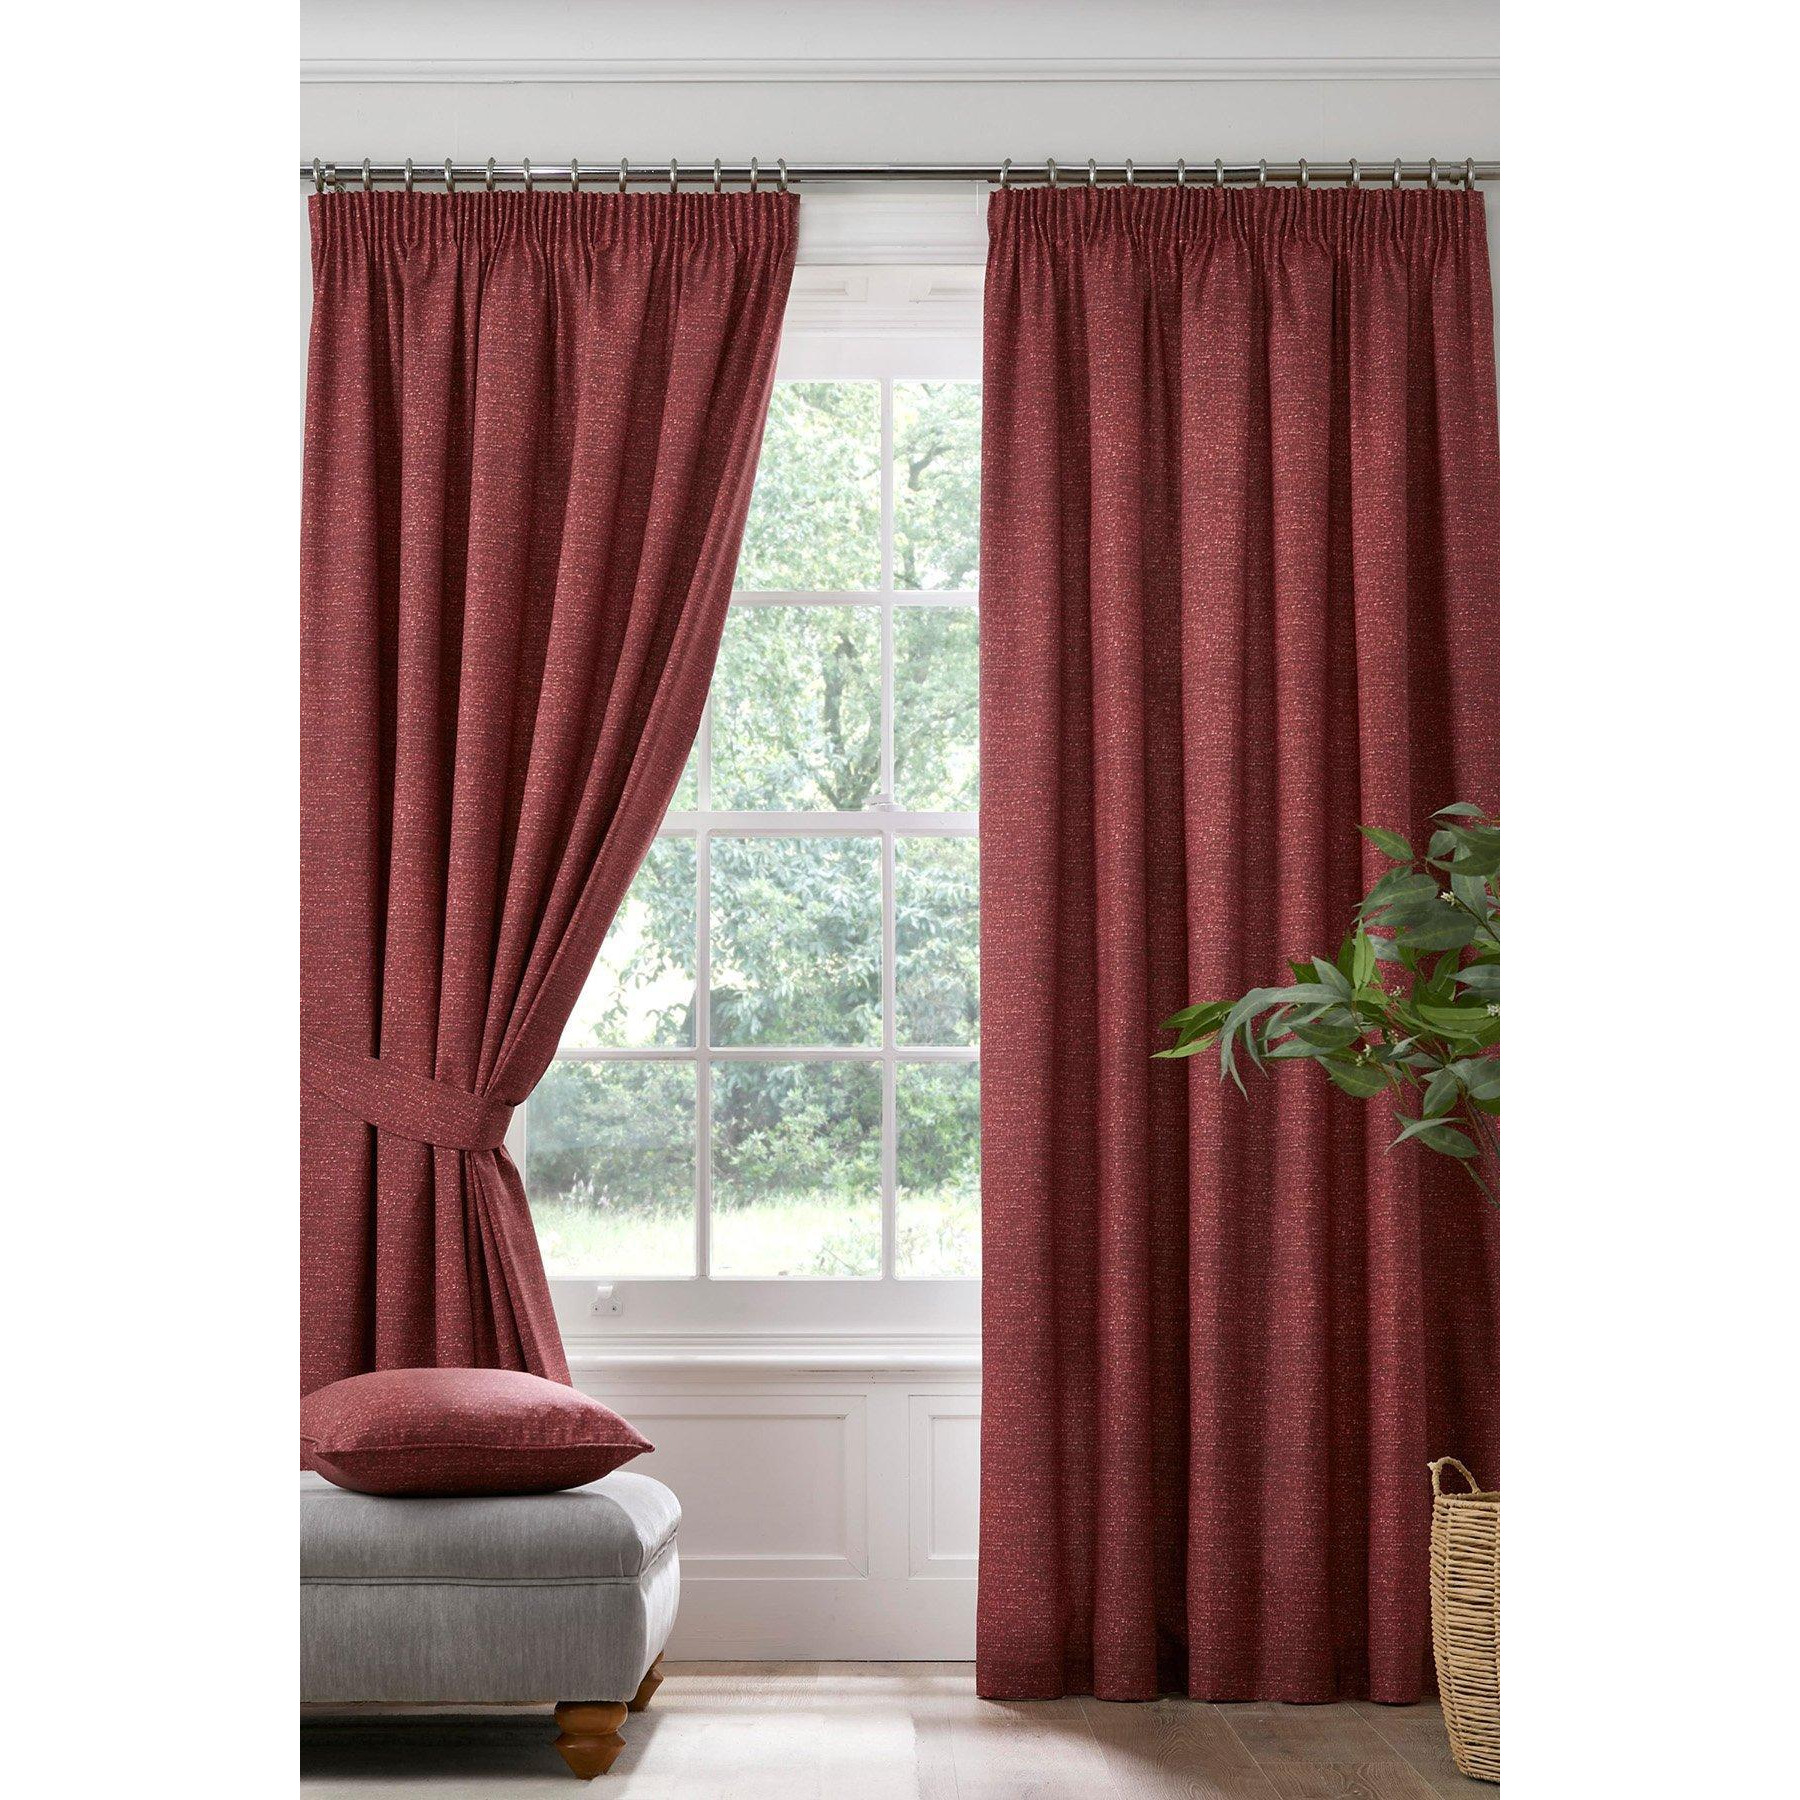 'Pembrey' Textured Pair of Pencil Pleat Curtains With Tie-Backs - image 1